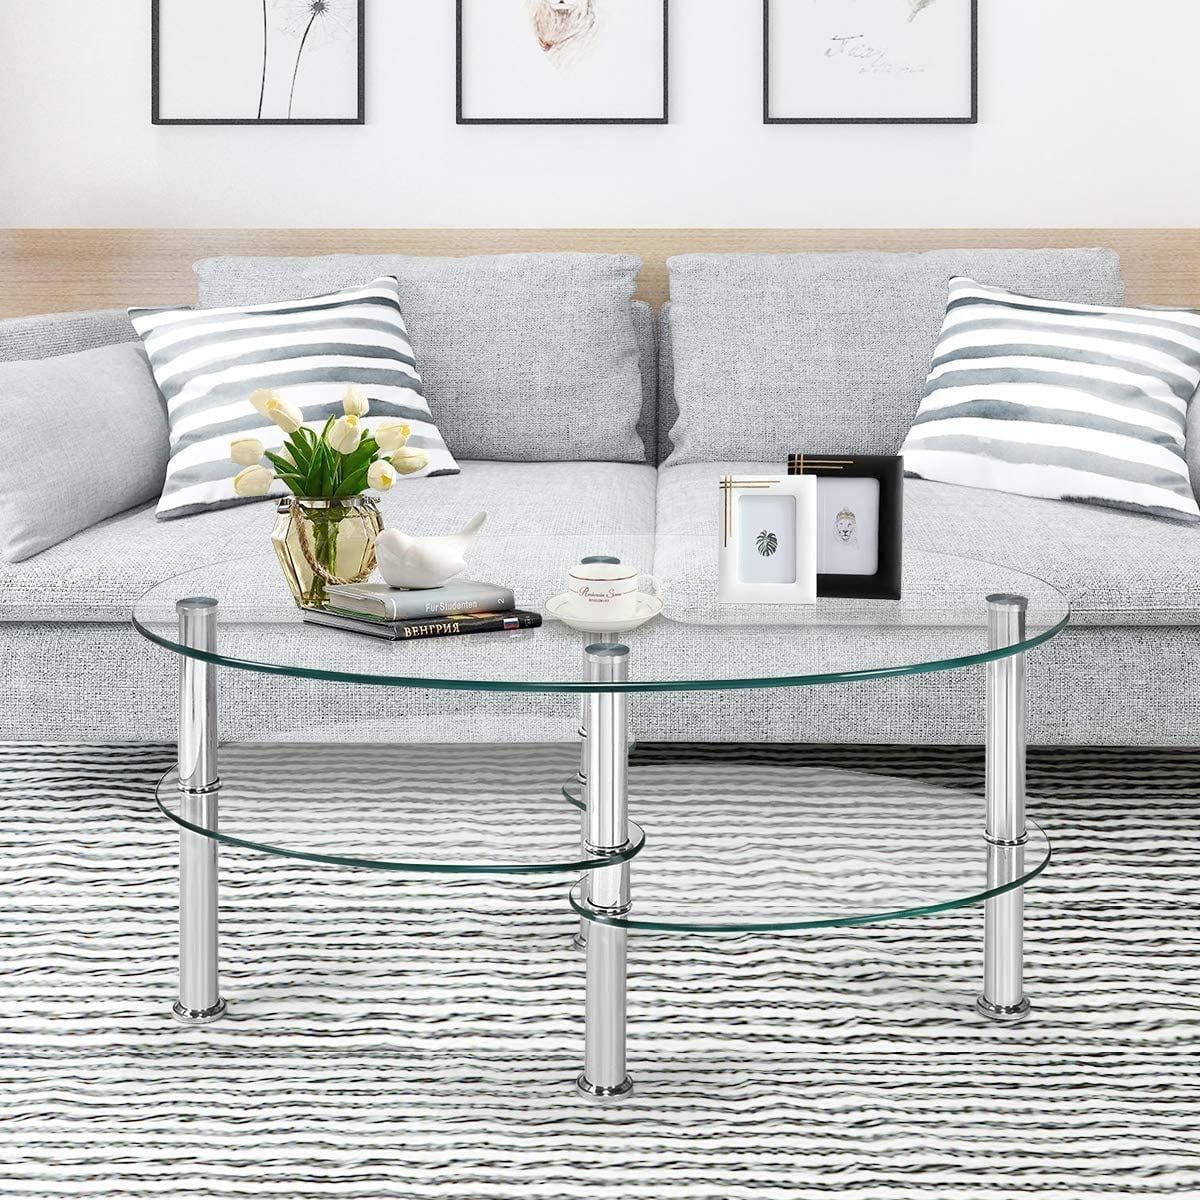 Alpulon Tempered Glass Coffee Table Oval 3 Tier Steel Tea Table For Home  Living Room Office – Walmart With Tempered Glass Oval Side Tables (View 11 of 15)